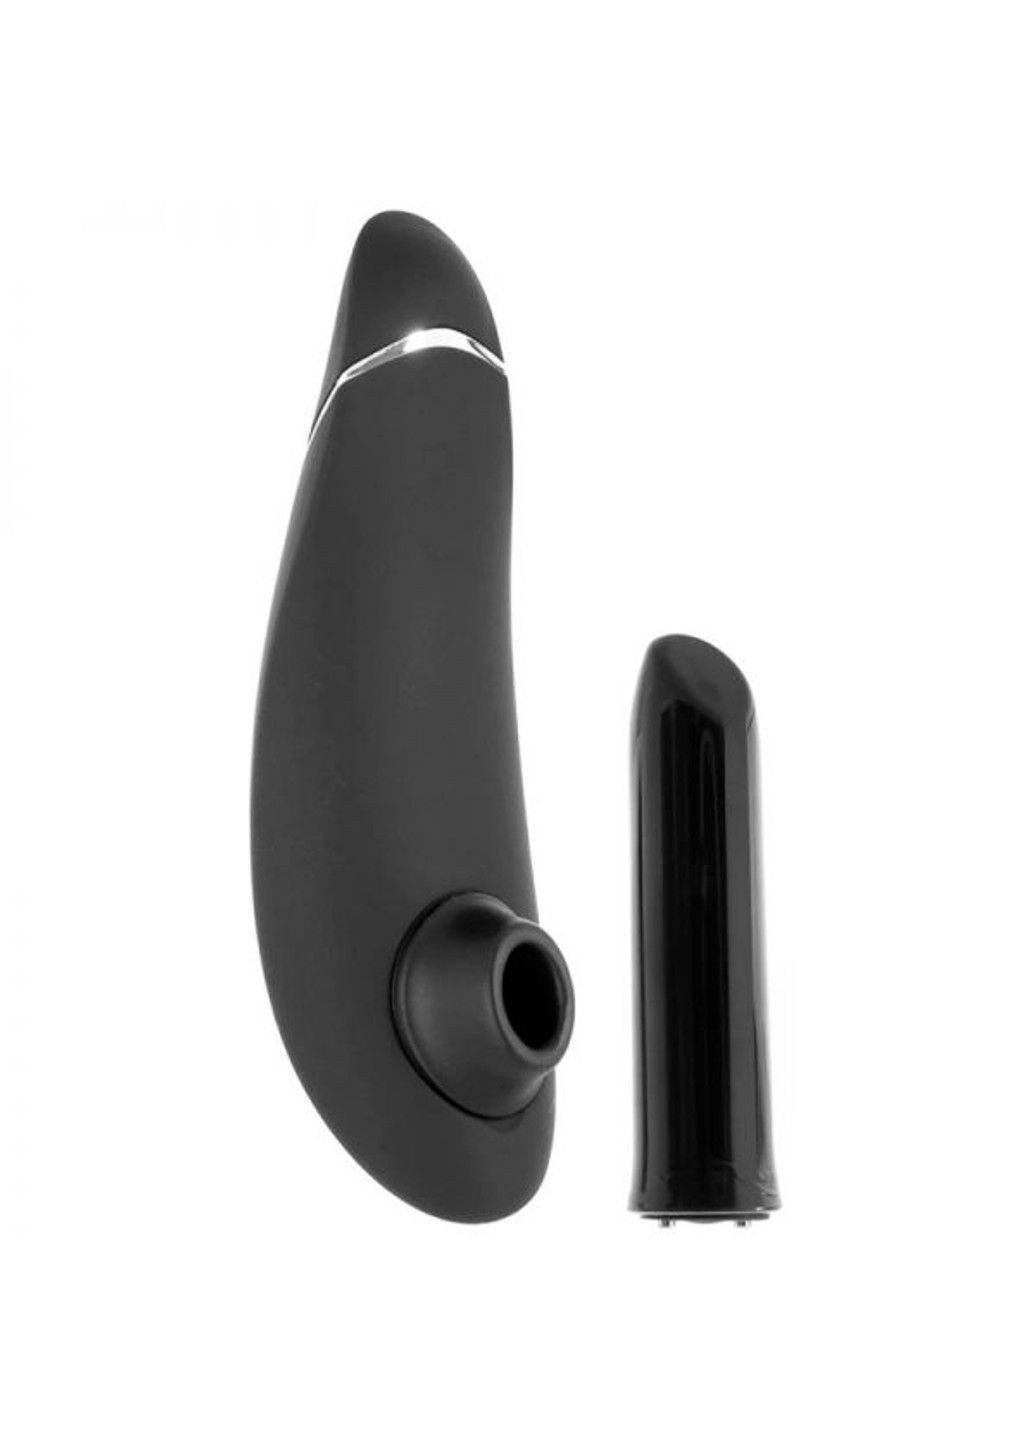 Набір секс іграшок Silver Delights Collection Womanizer We-Vibe (290667074)